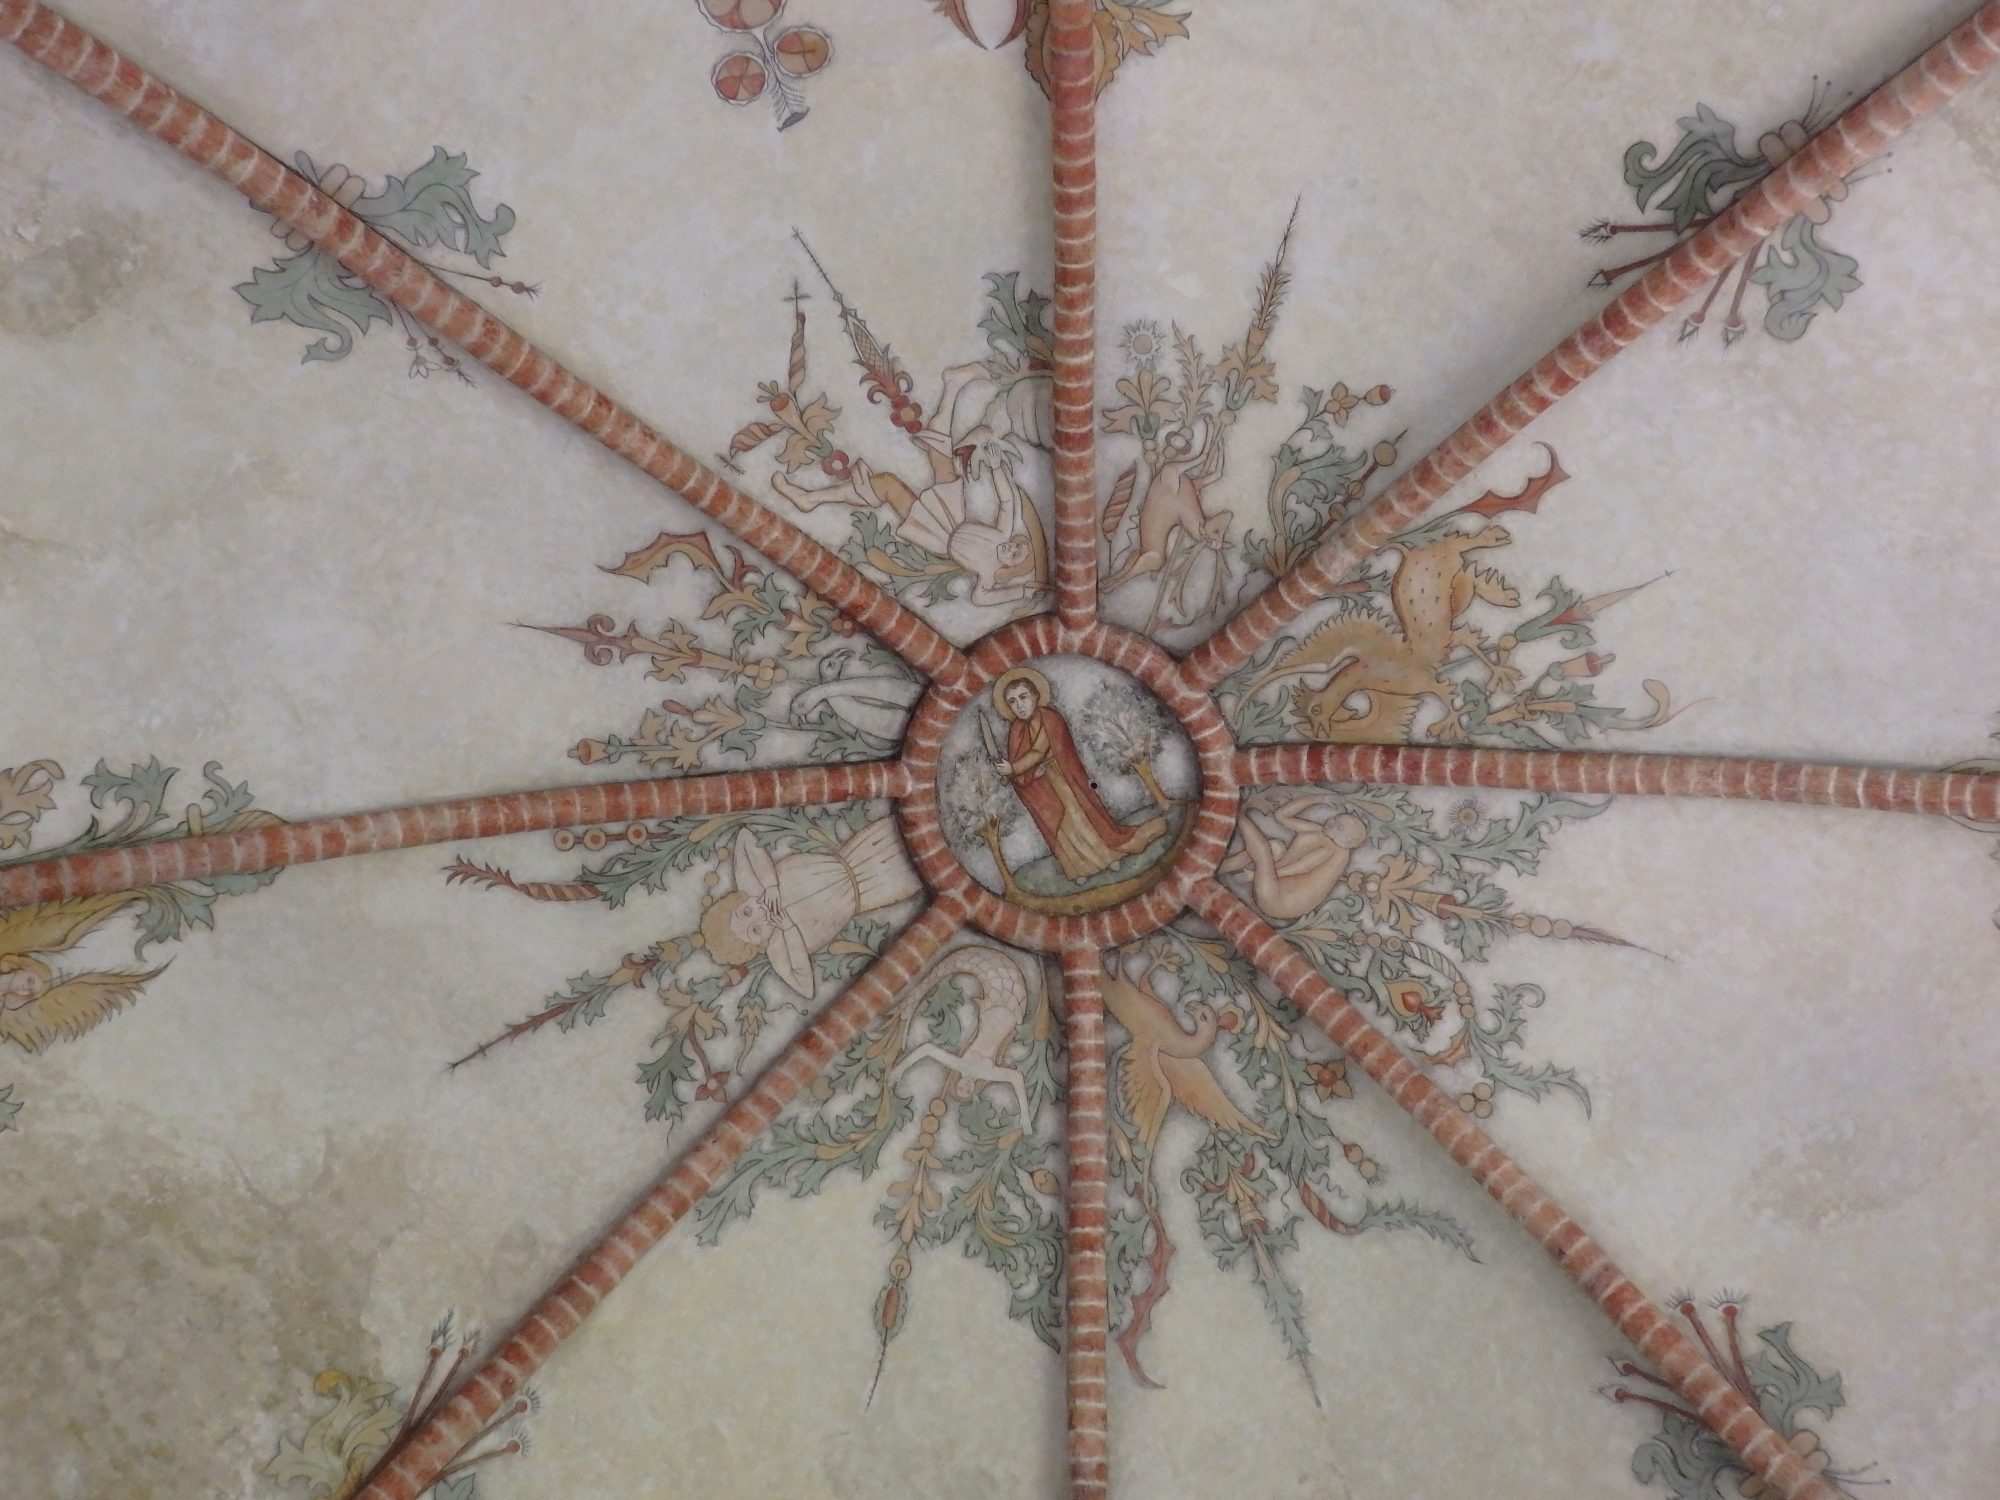 a ceiling fresco at the top of a dome in Stedum church in Groningen province